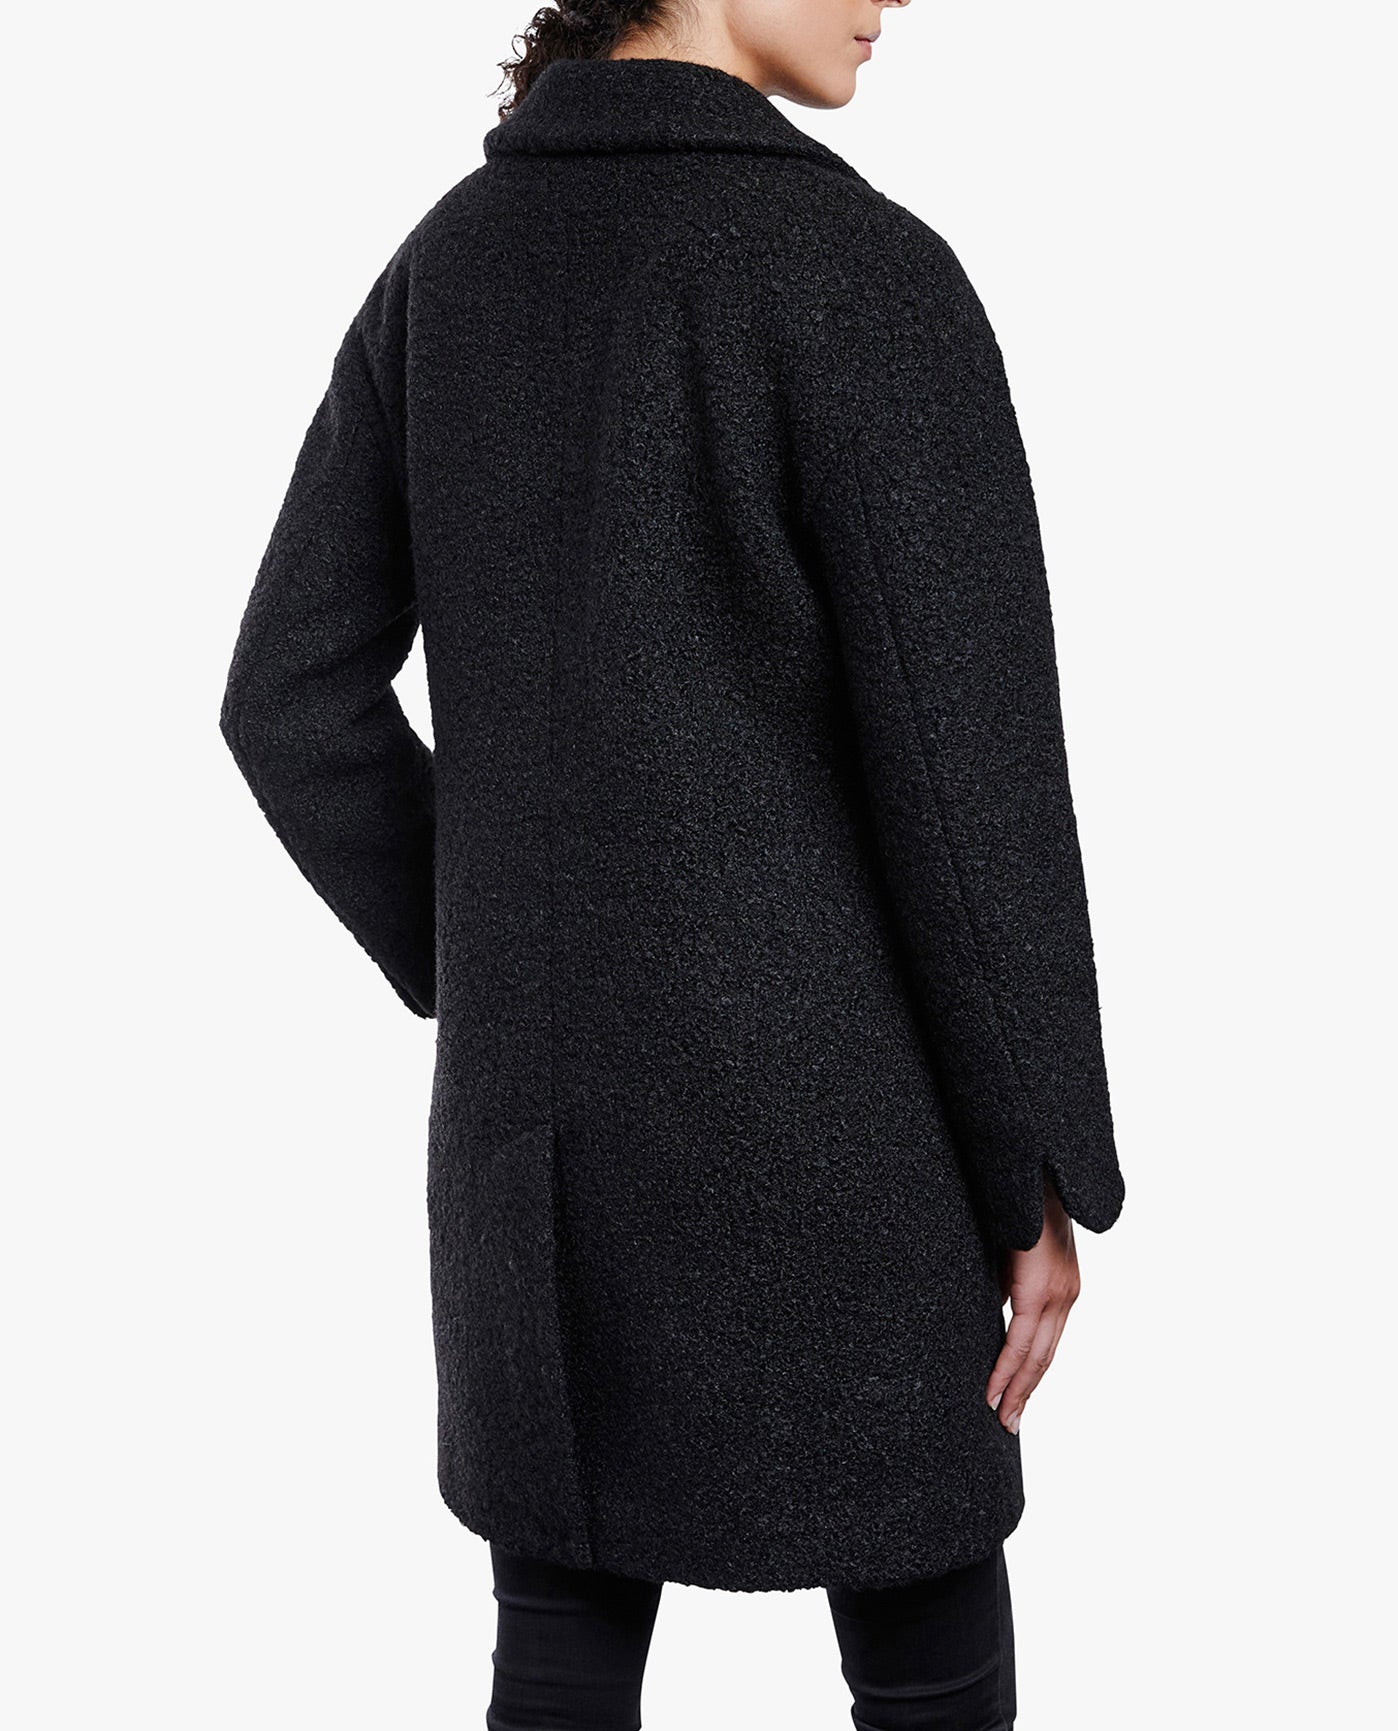 Back View Of SINGLE BUTTON-FRONT 35 INCH PEACOAT | BLACK